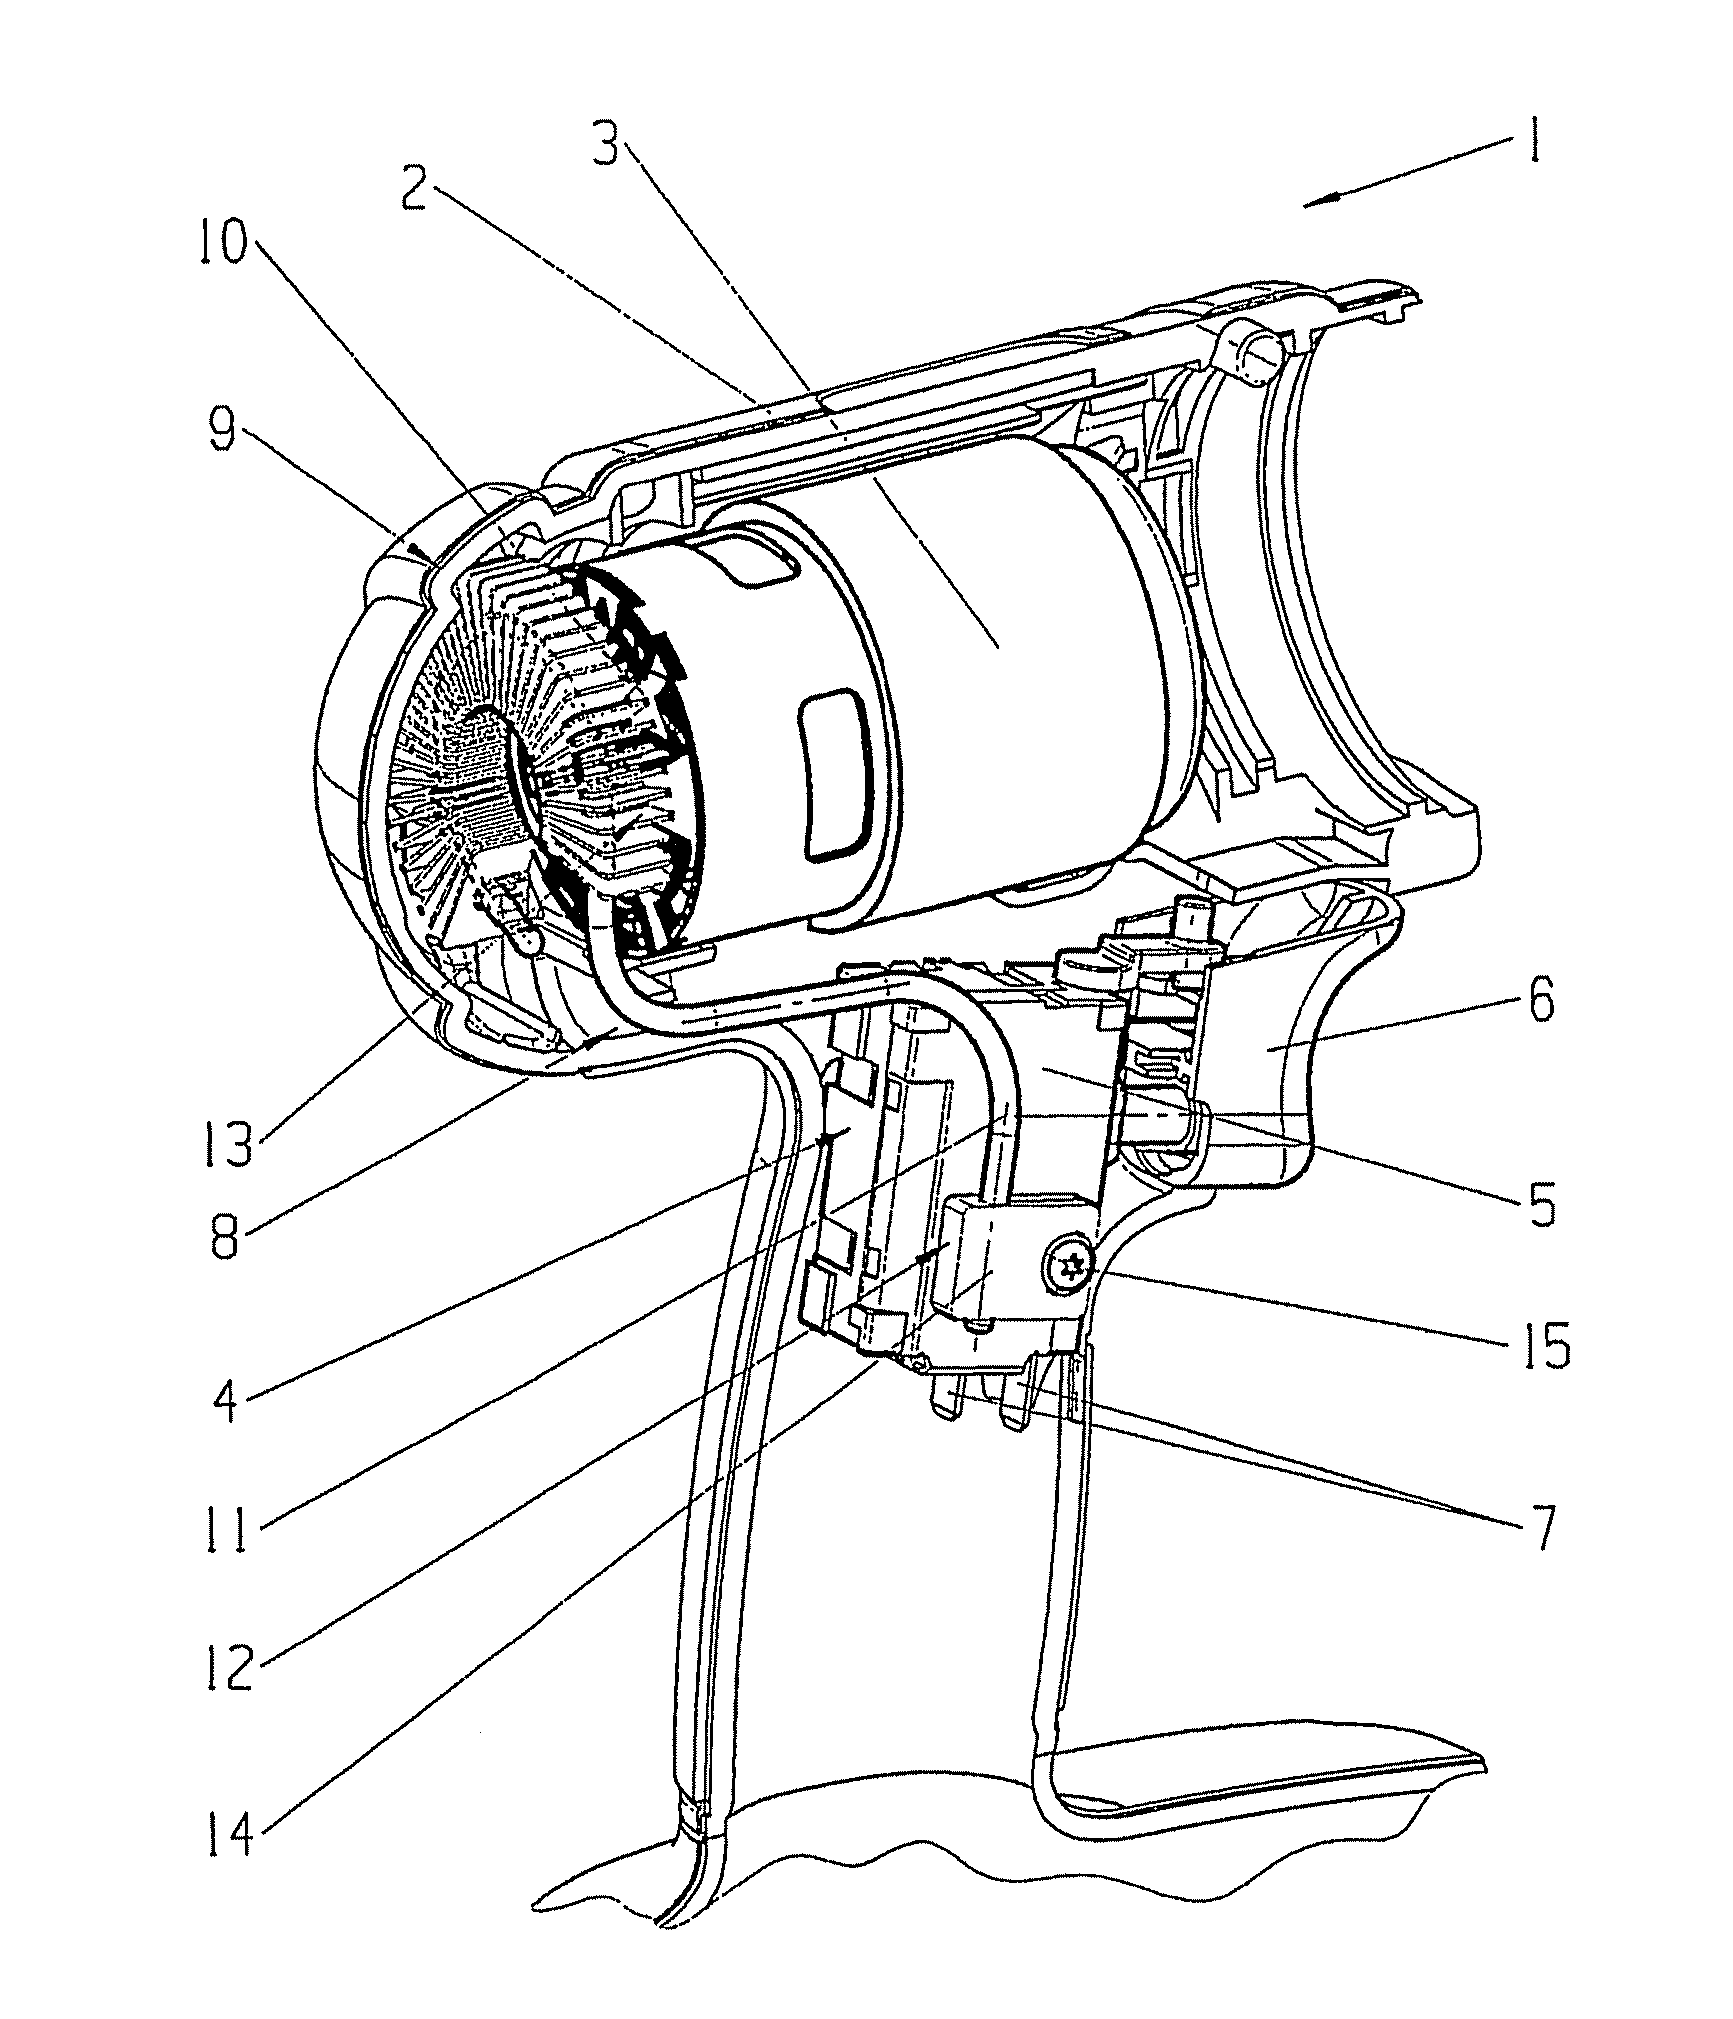 Control device, in particular in the form of an electric switch for electric handtools